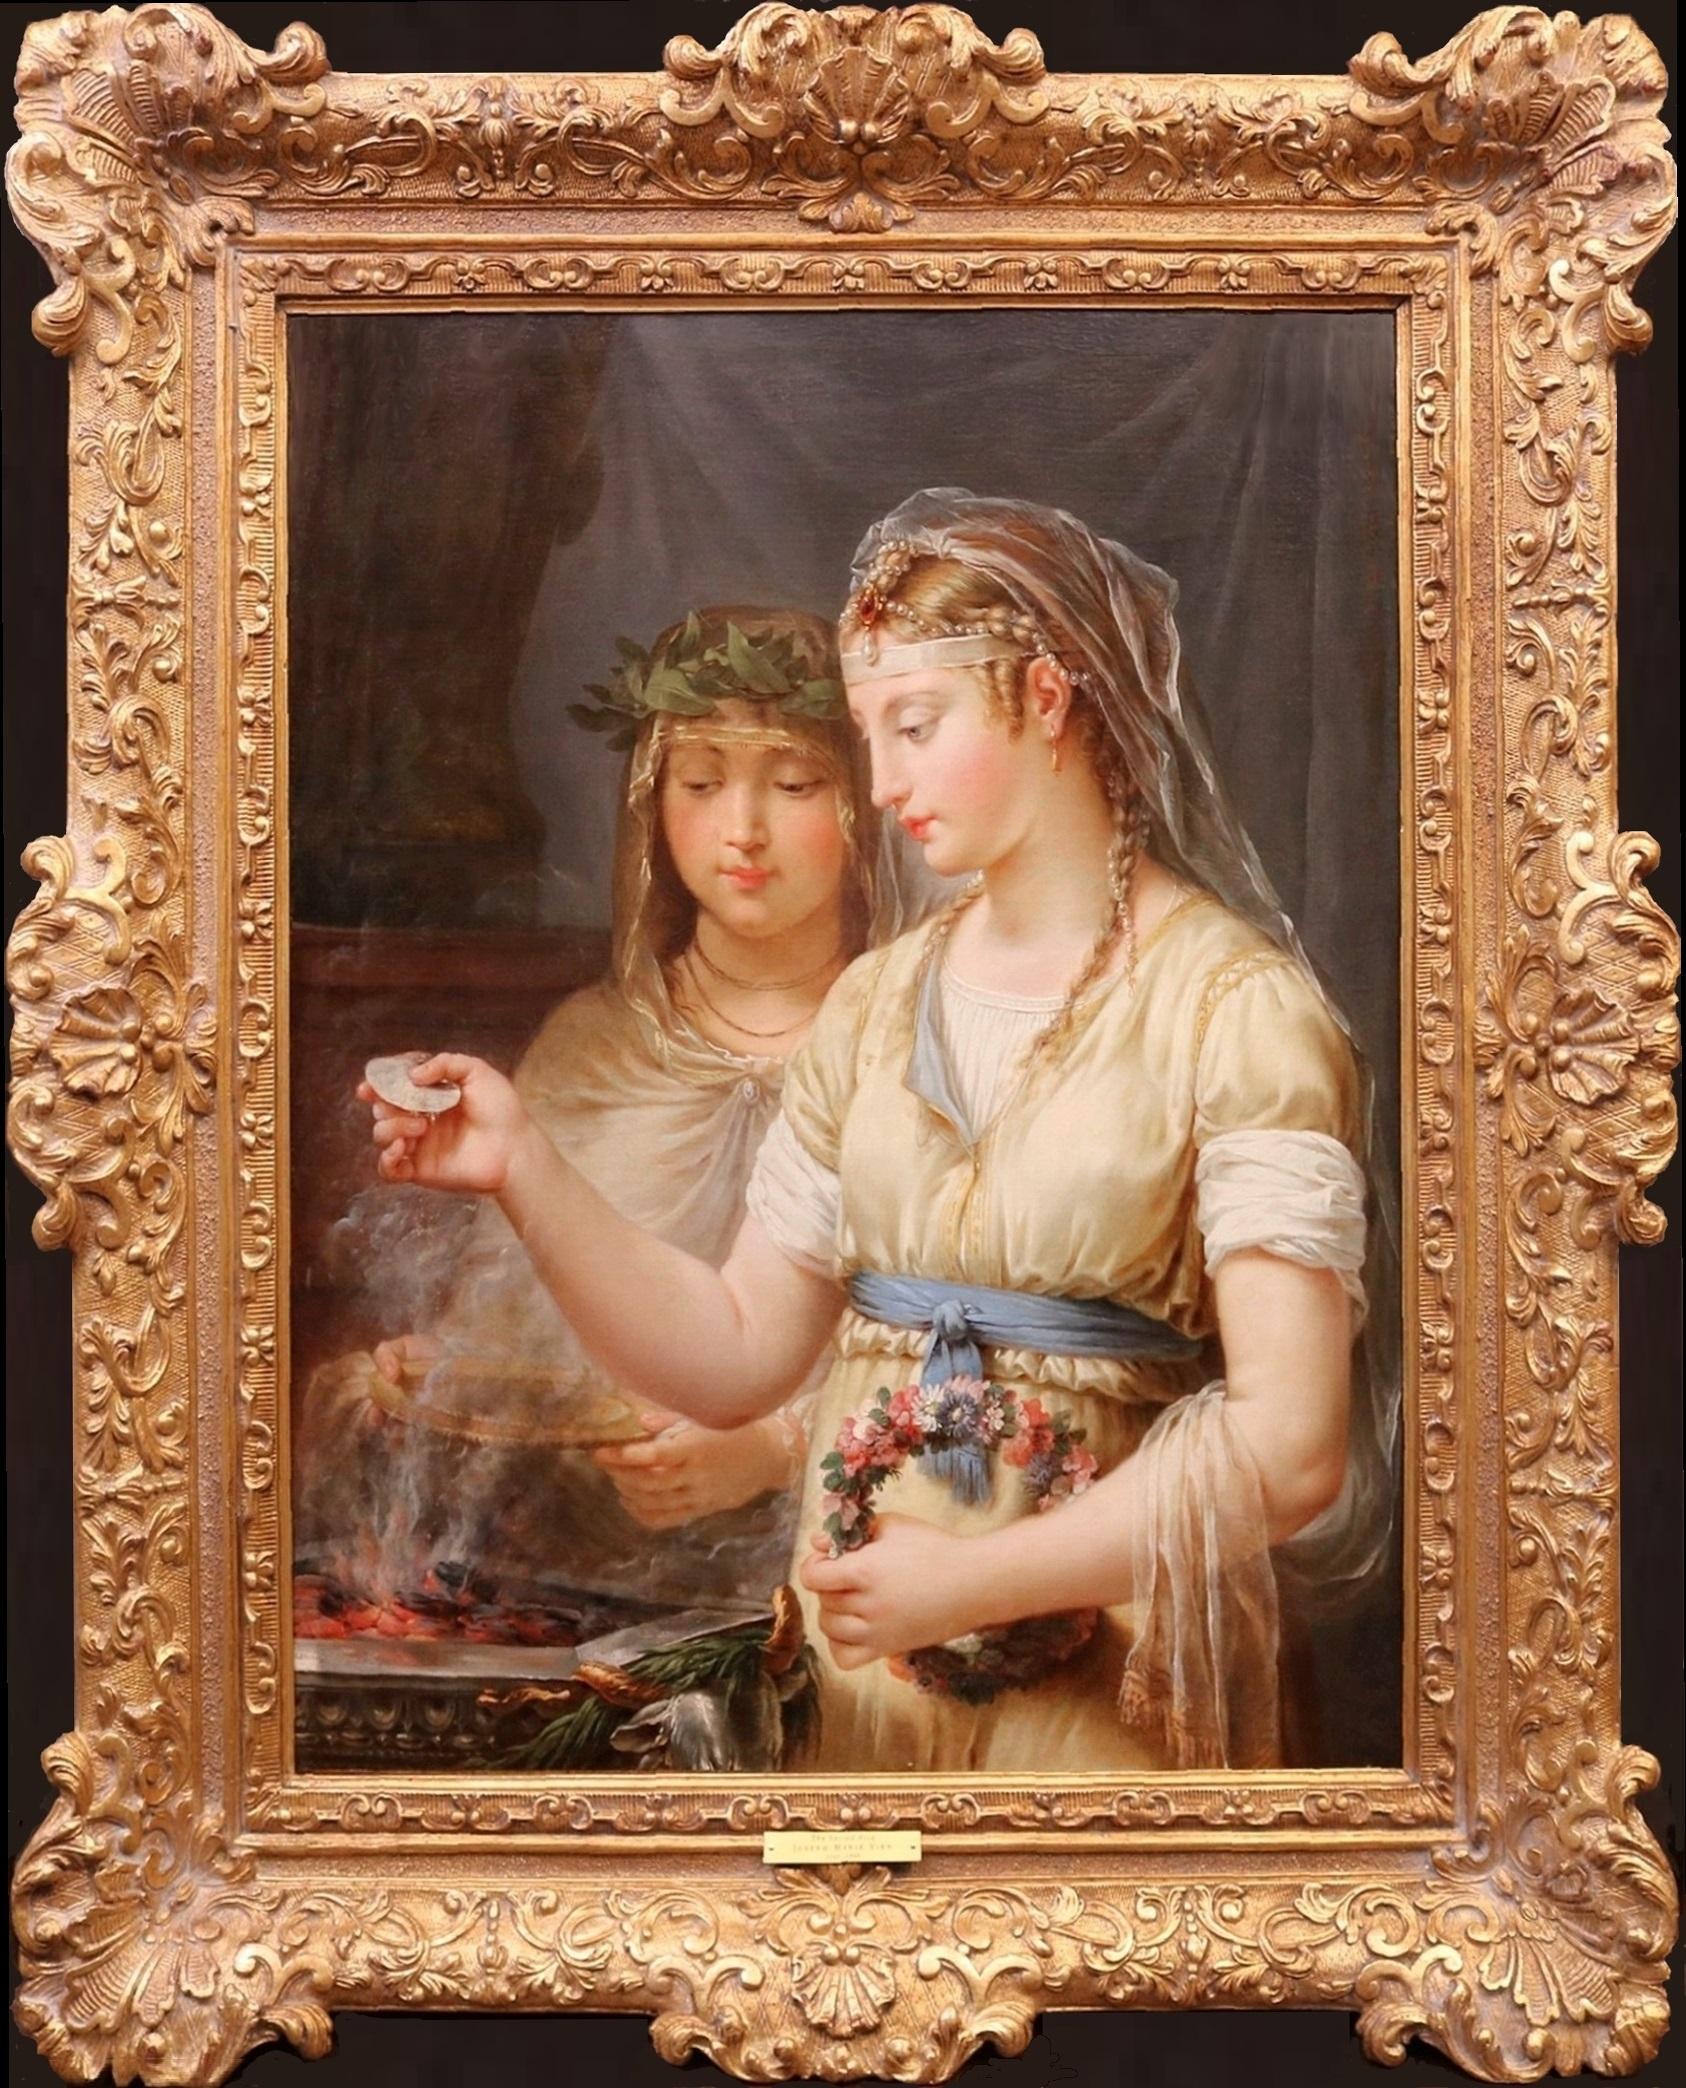 Joseph-Marie Vien Portrait Painting - The Scared Fire of Ancient Rome - 19th Century Oil Painting of Vestal Virgins